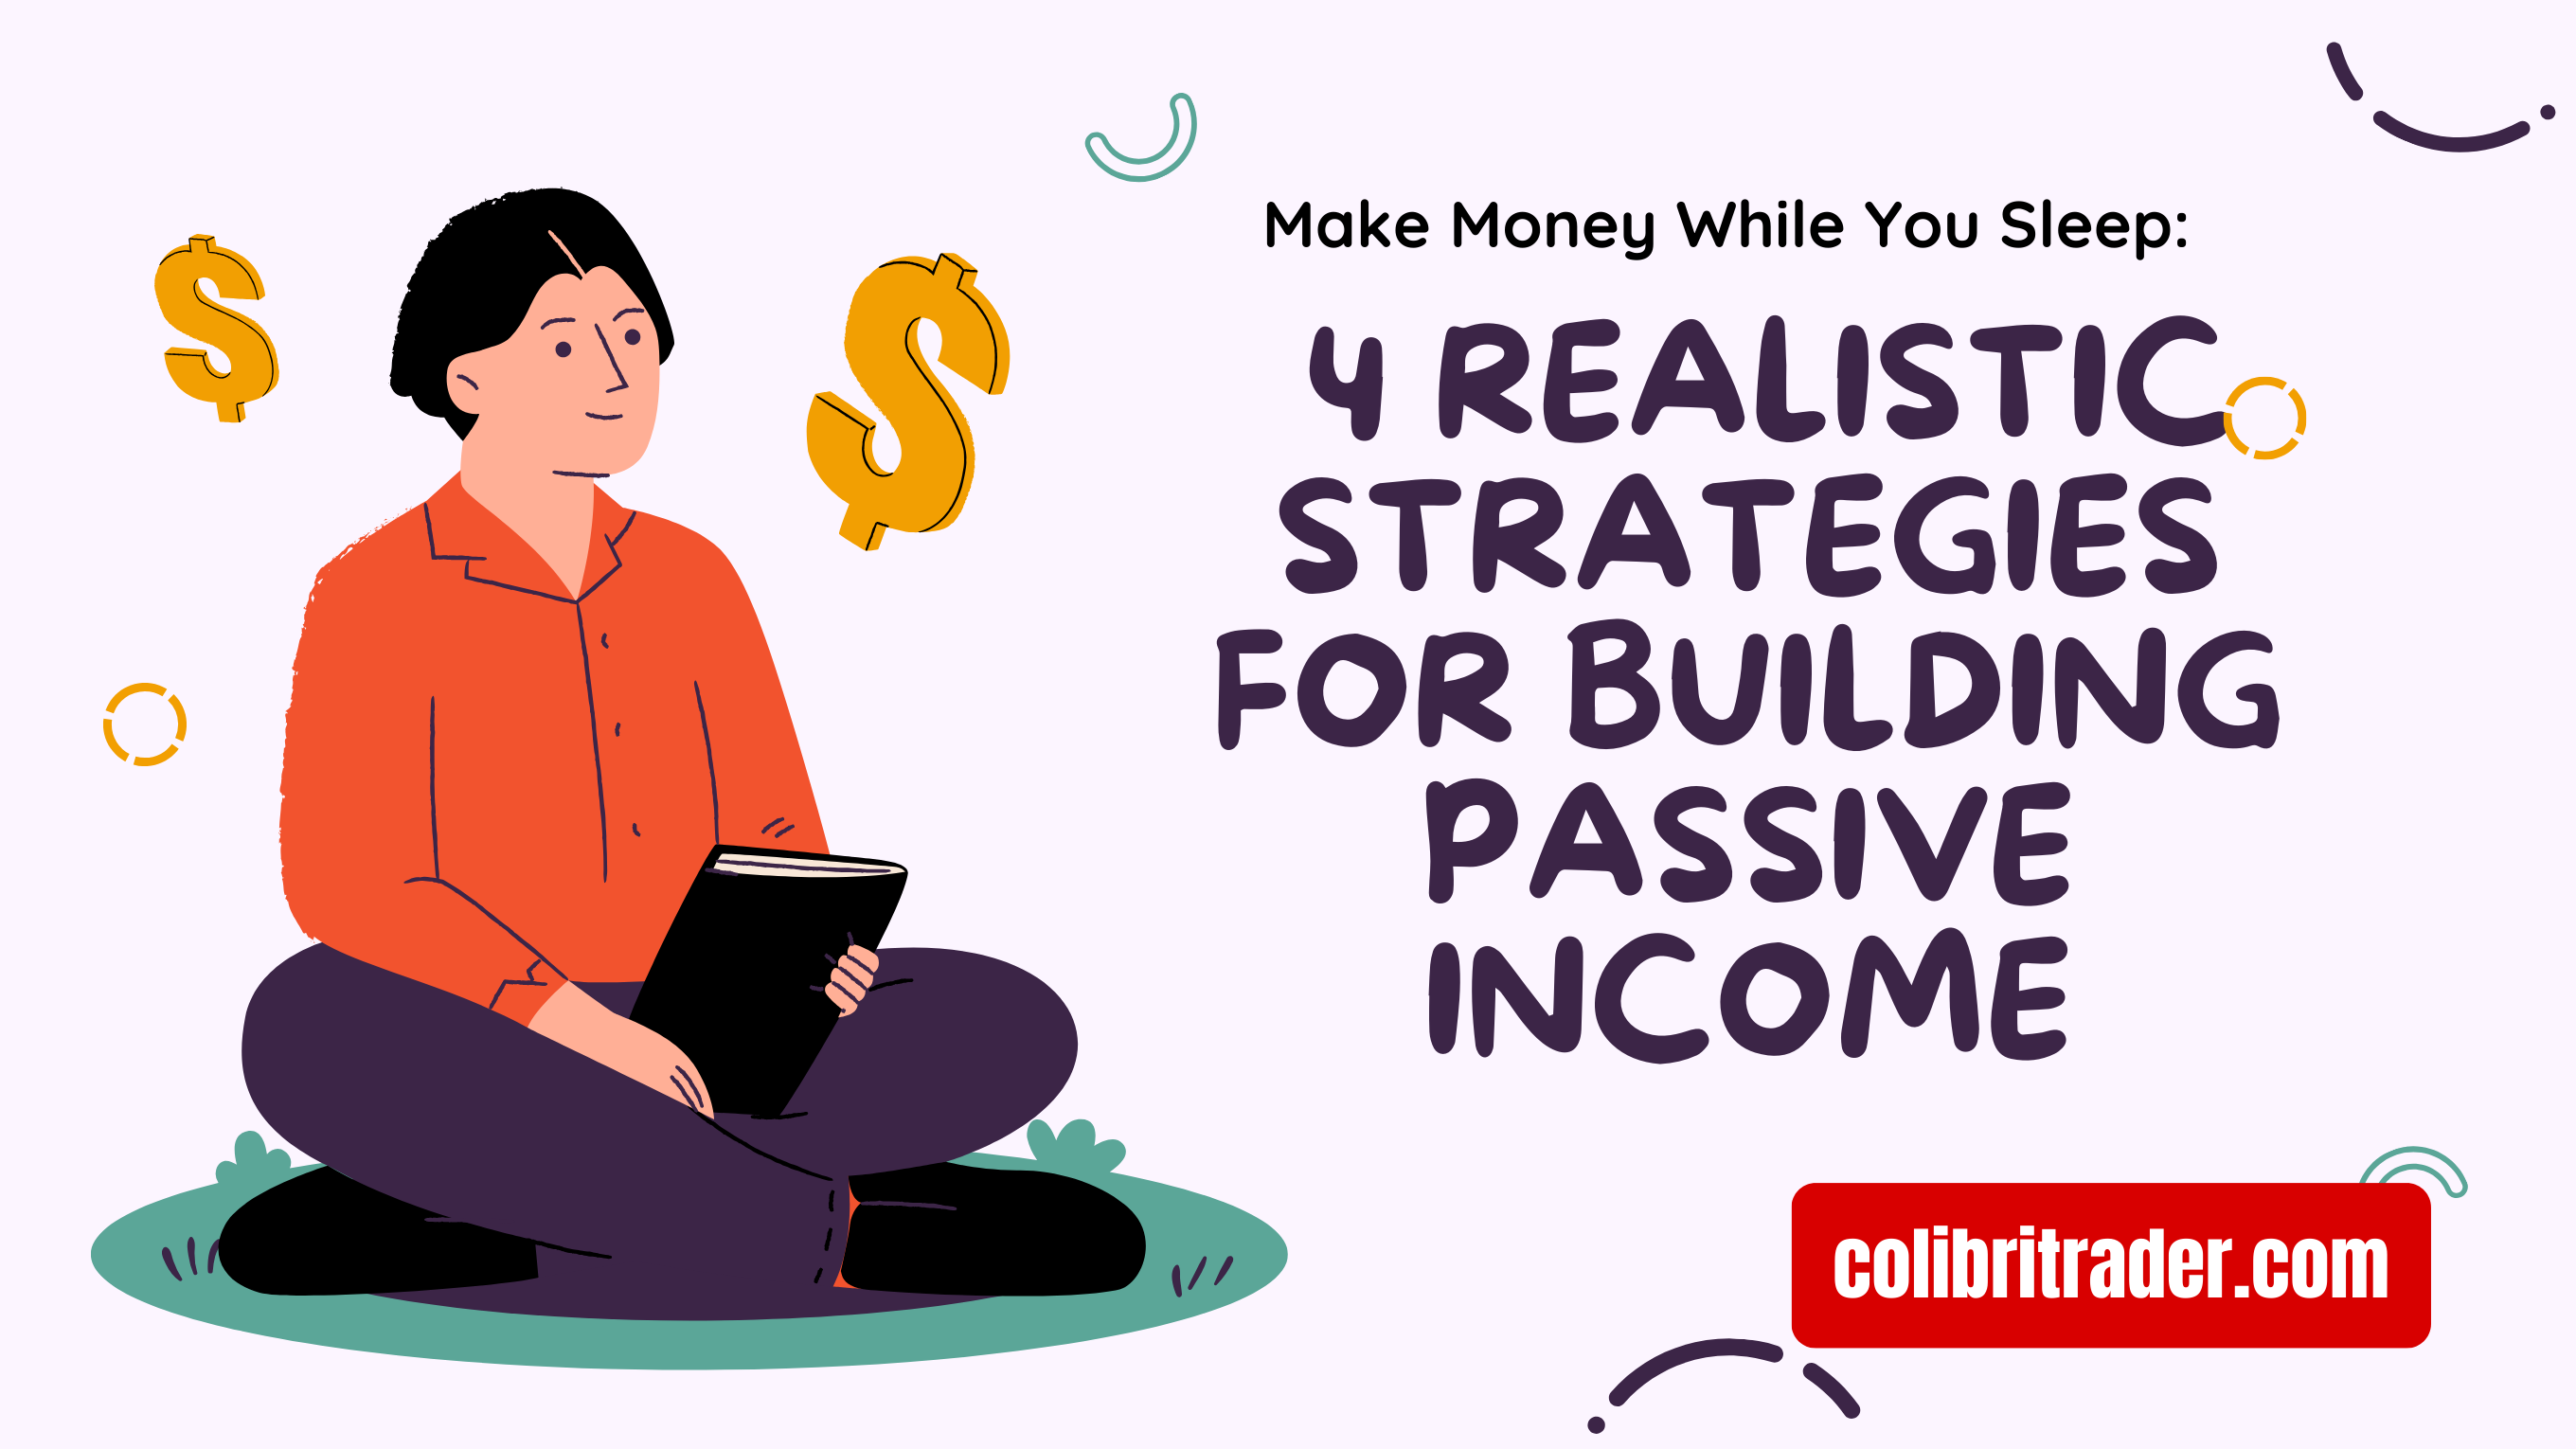 Make Money While You Sleep: 4 Realistic Strategies for Building Passive Income